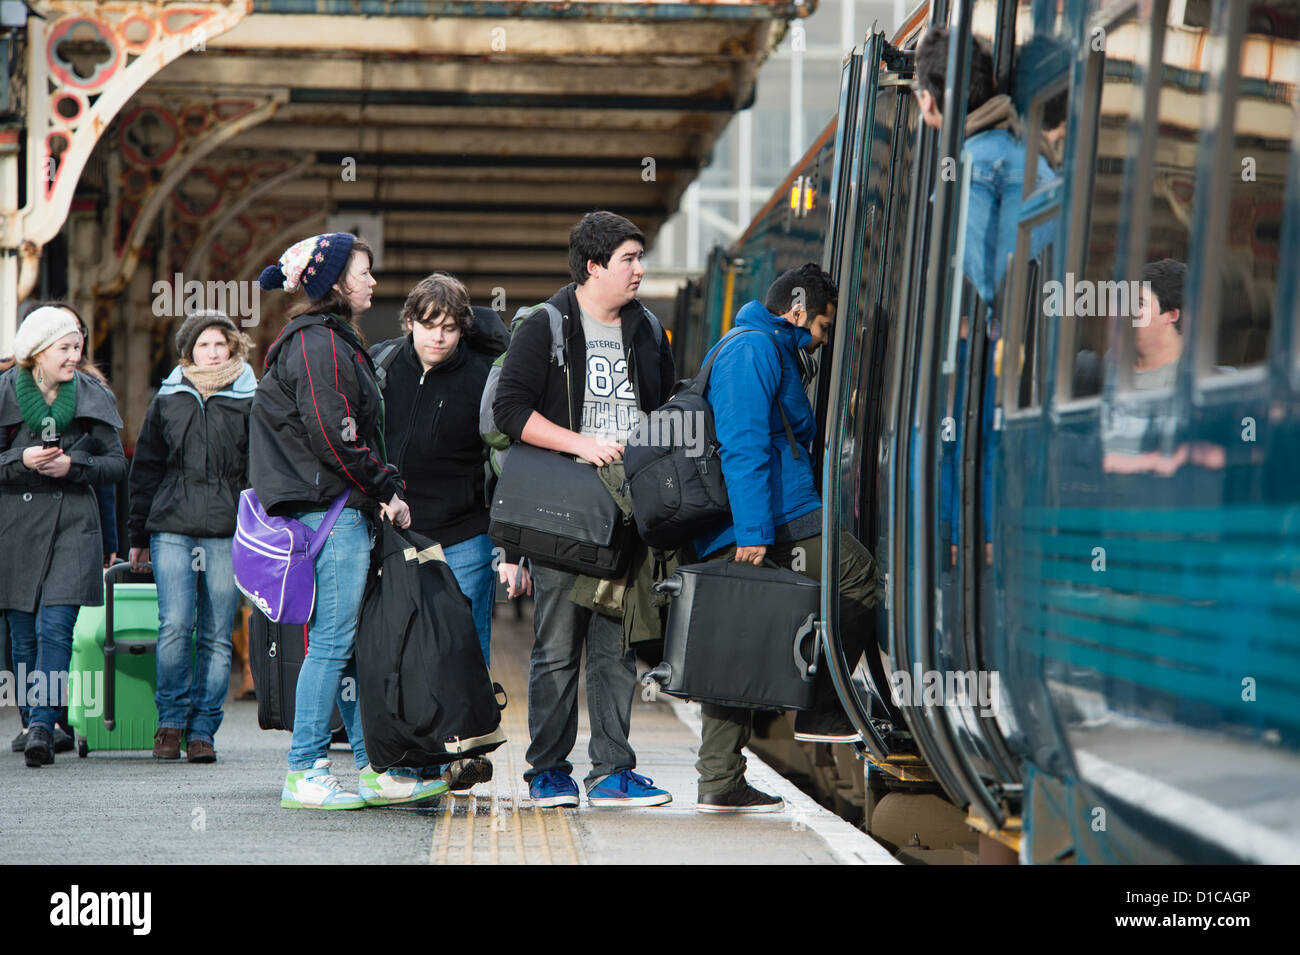 Aberystwyth, Wales, UK, December 15 2012:  Groups of young University and college students carrying bags of luggage catching the Arriva Wales train from Aberystwyth railway station at the end of term, going home to their families for the Christmas holiday vacation Stock Photo